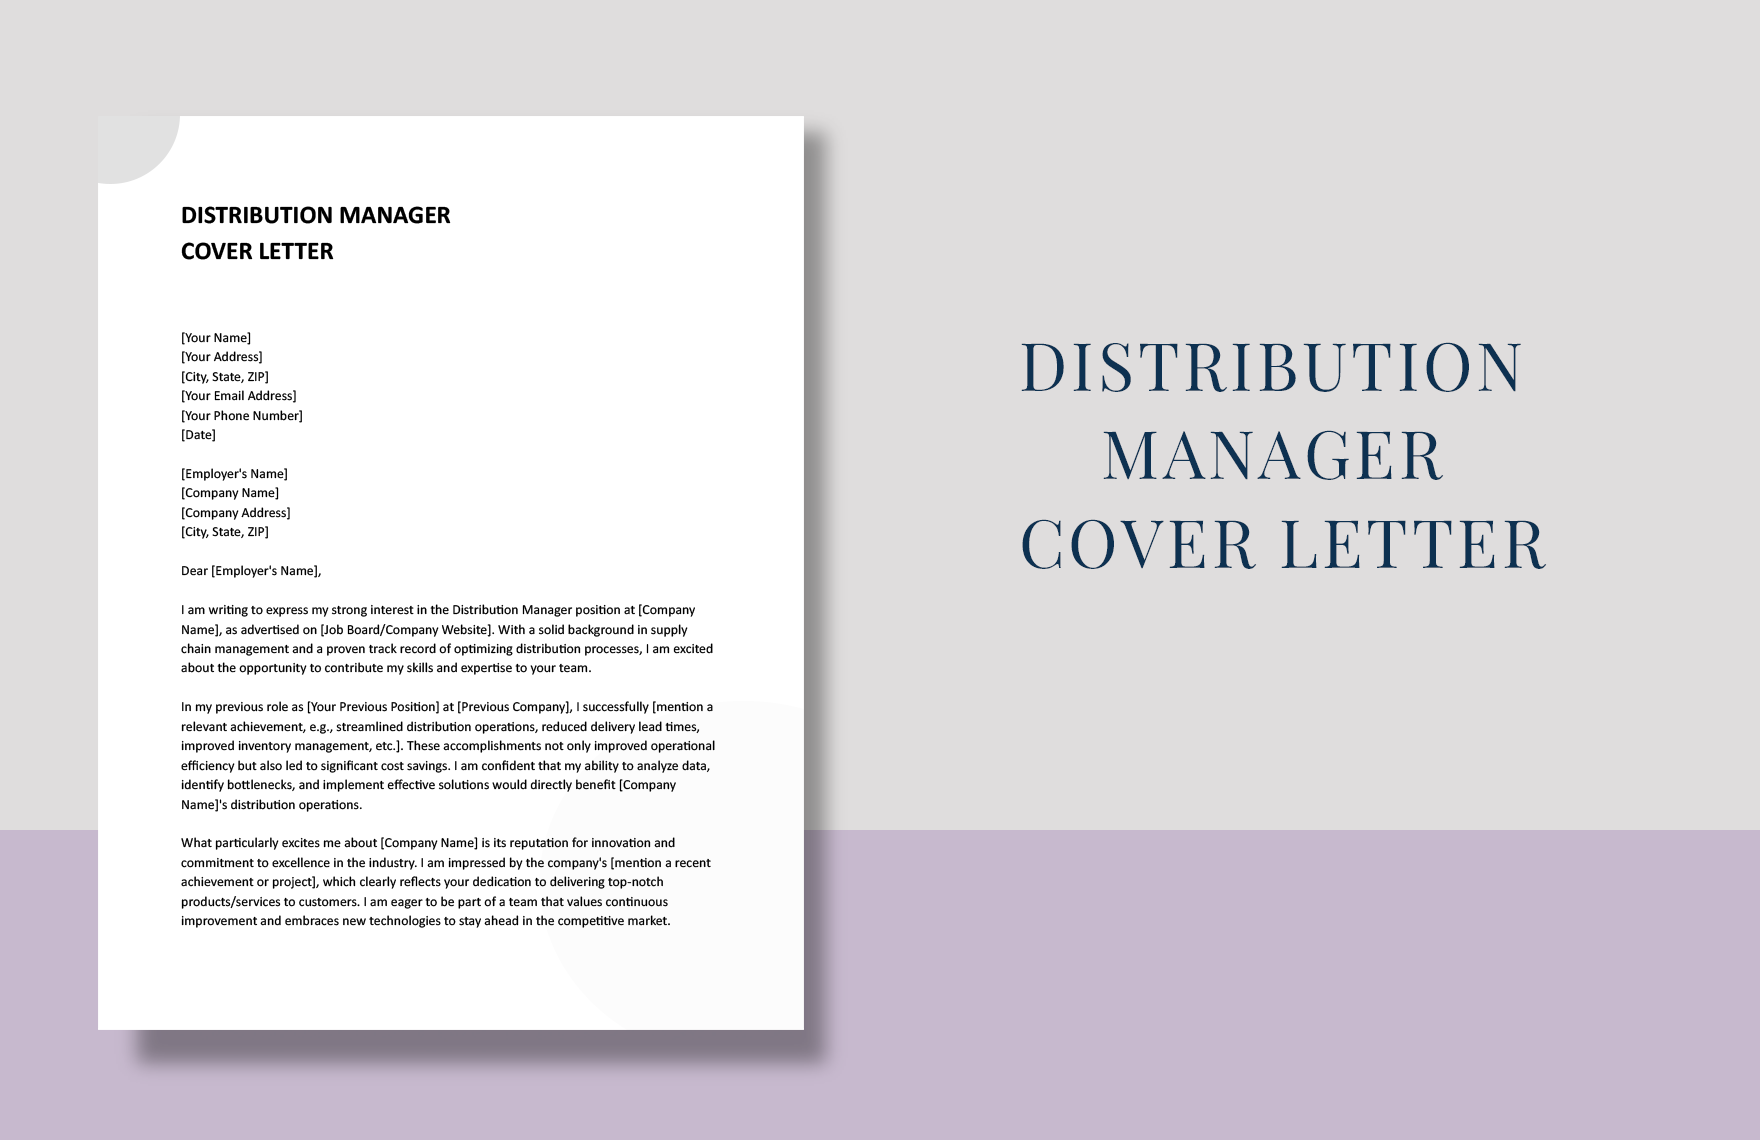 Distribution Manager Cover Letter